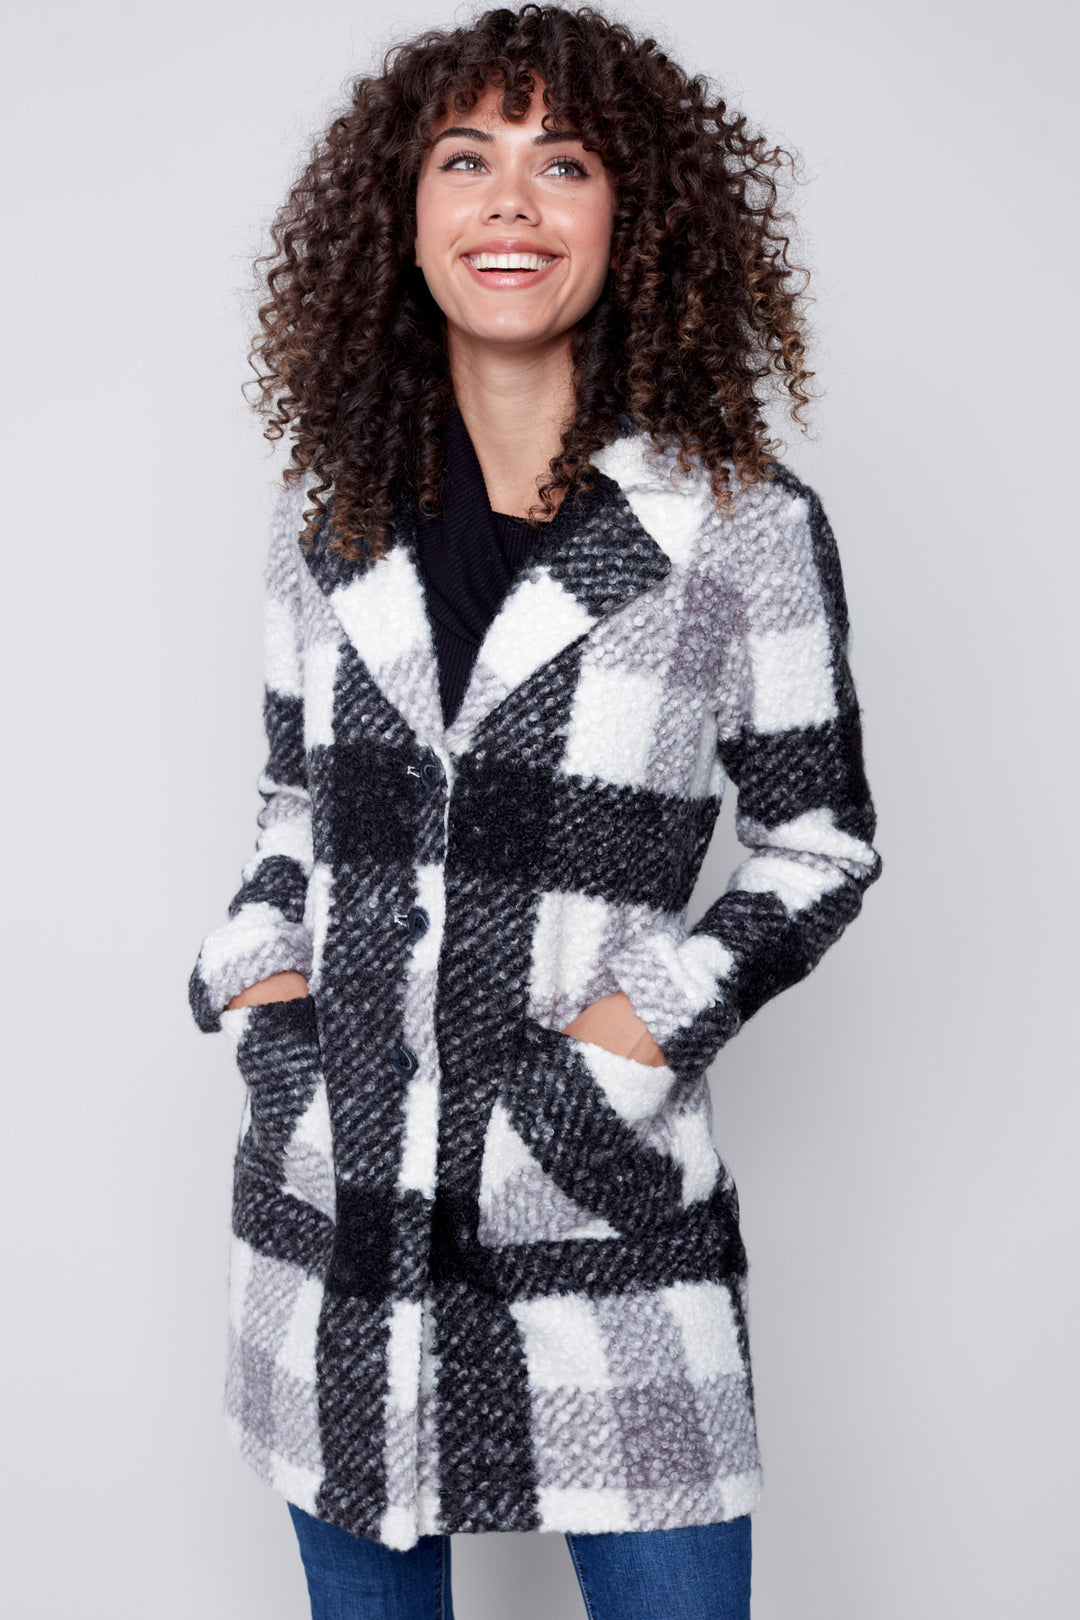 A luxurious bouclé knit coat tailored to provide a comfy and elegant look.